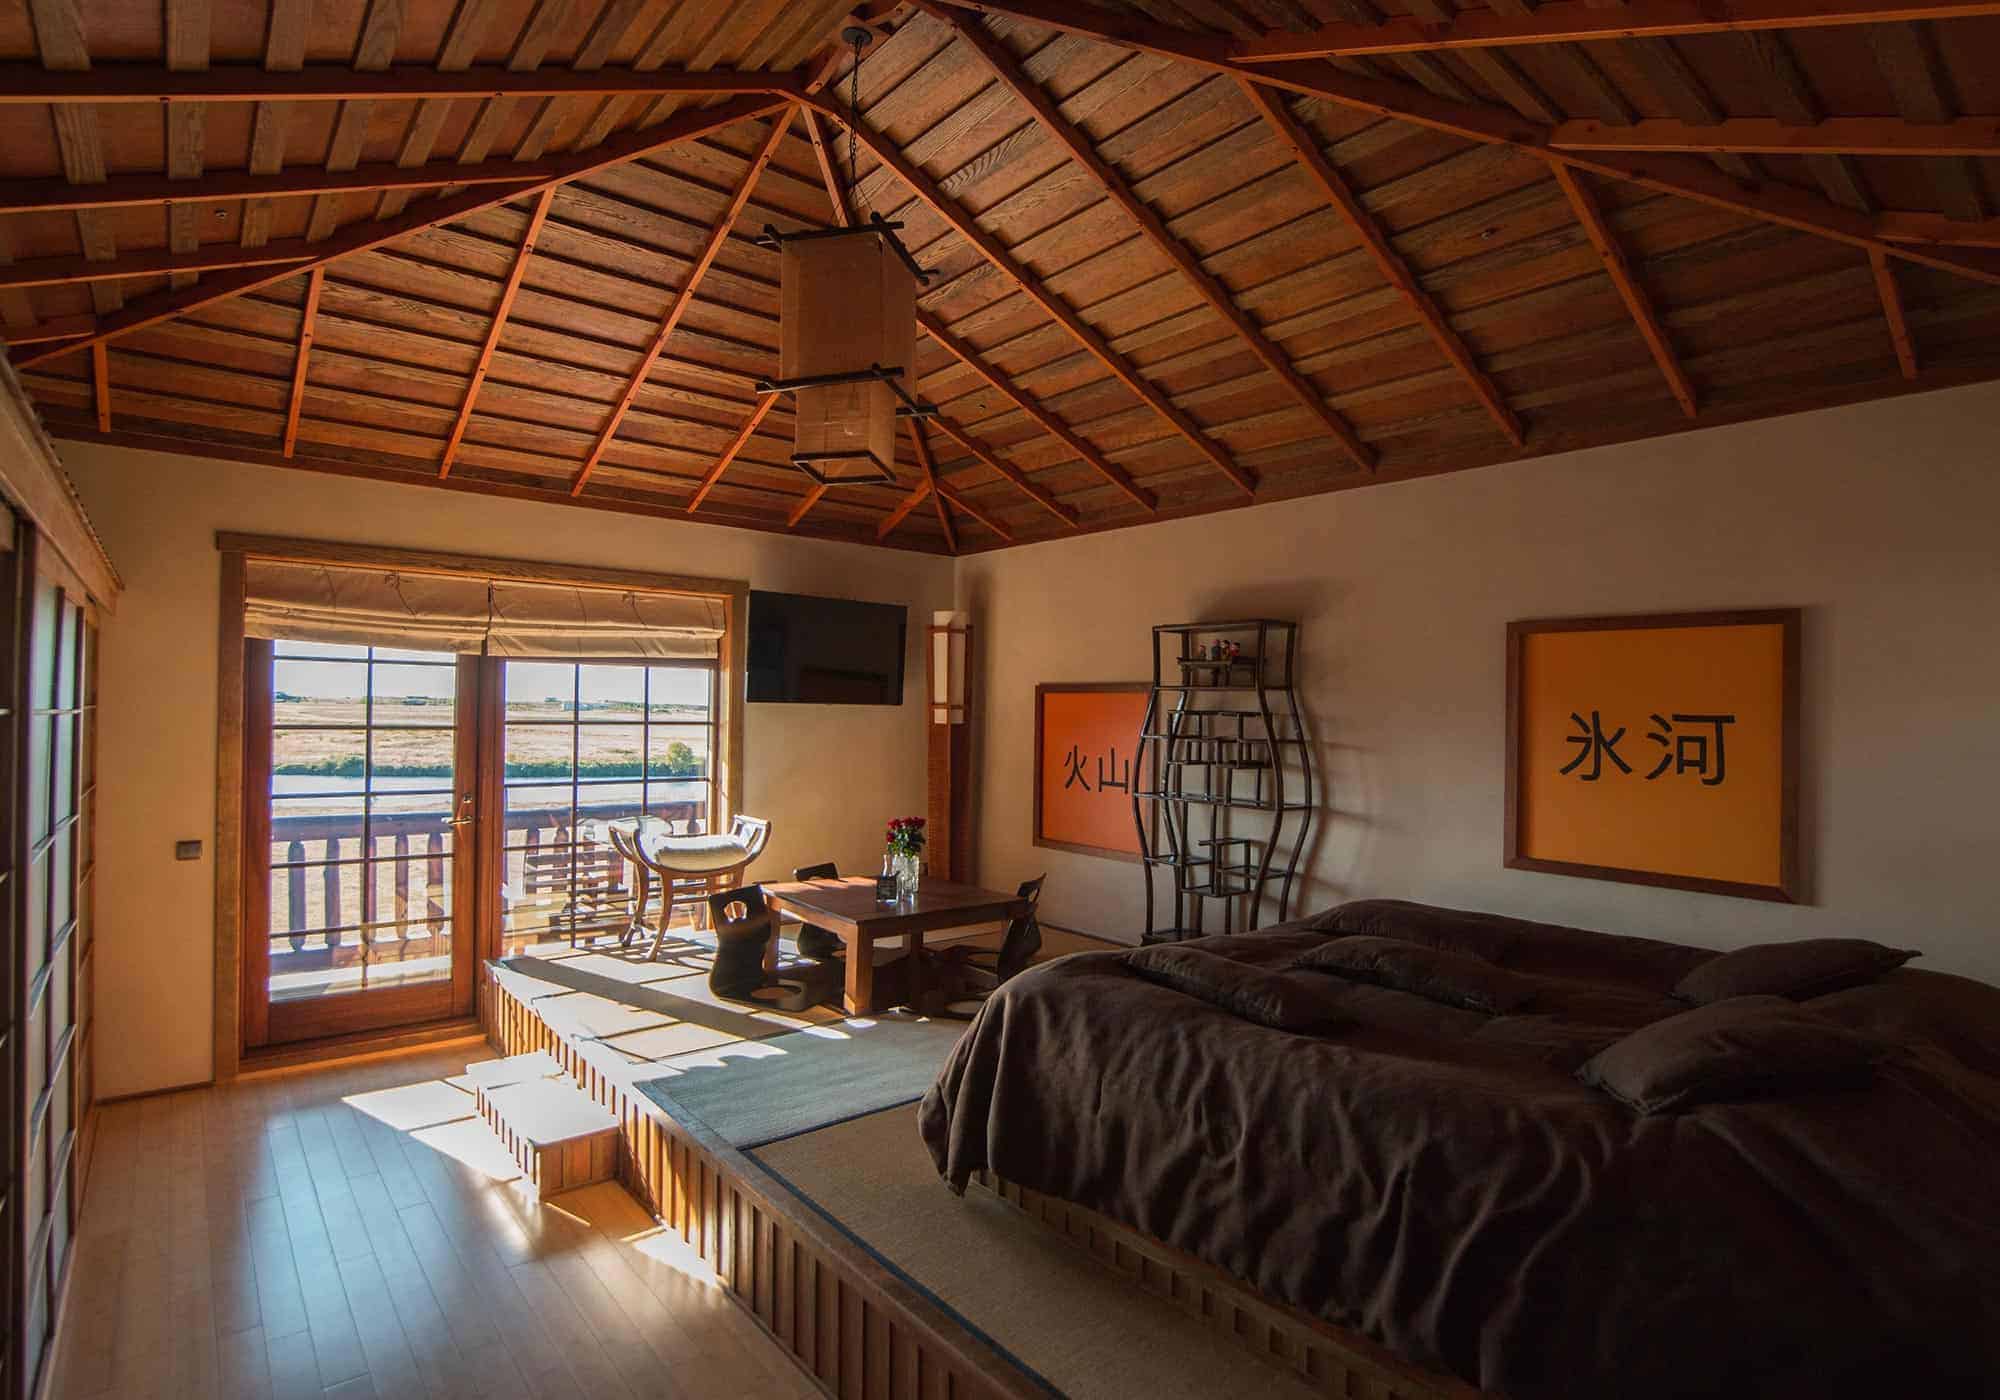 Hotel Rangá's Asia Suite with decor and artwork from Japan.